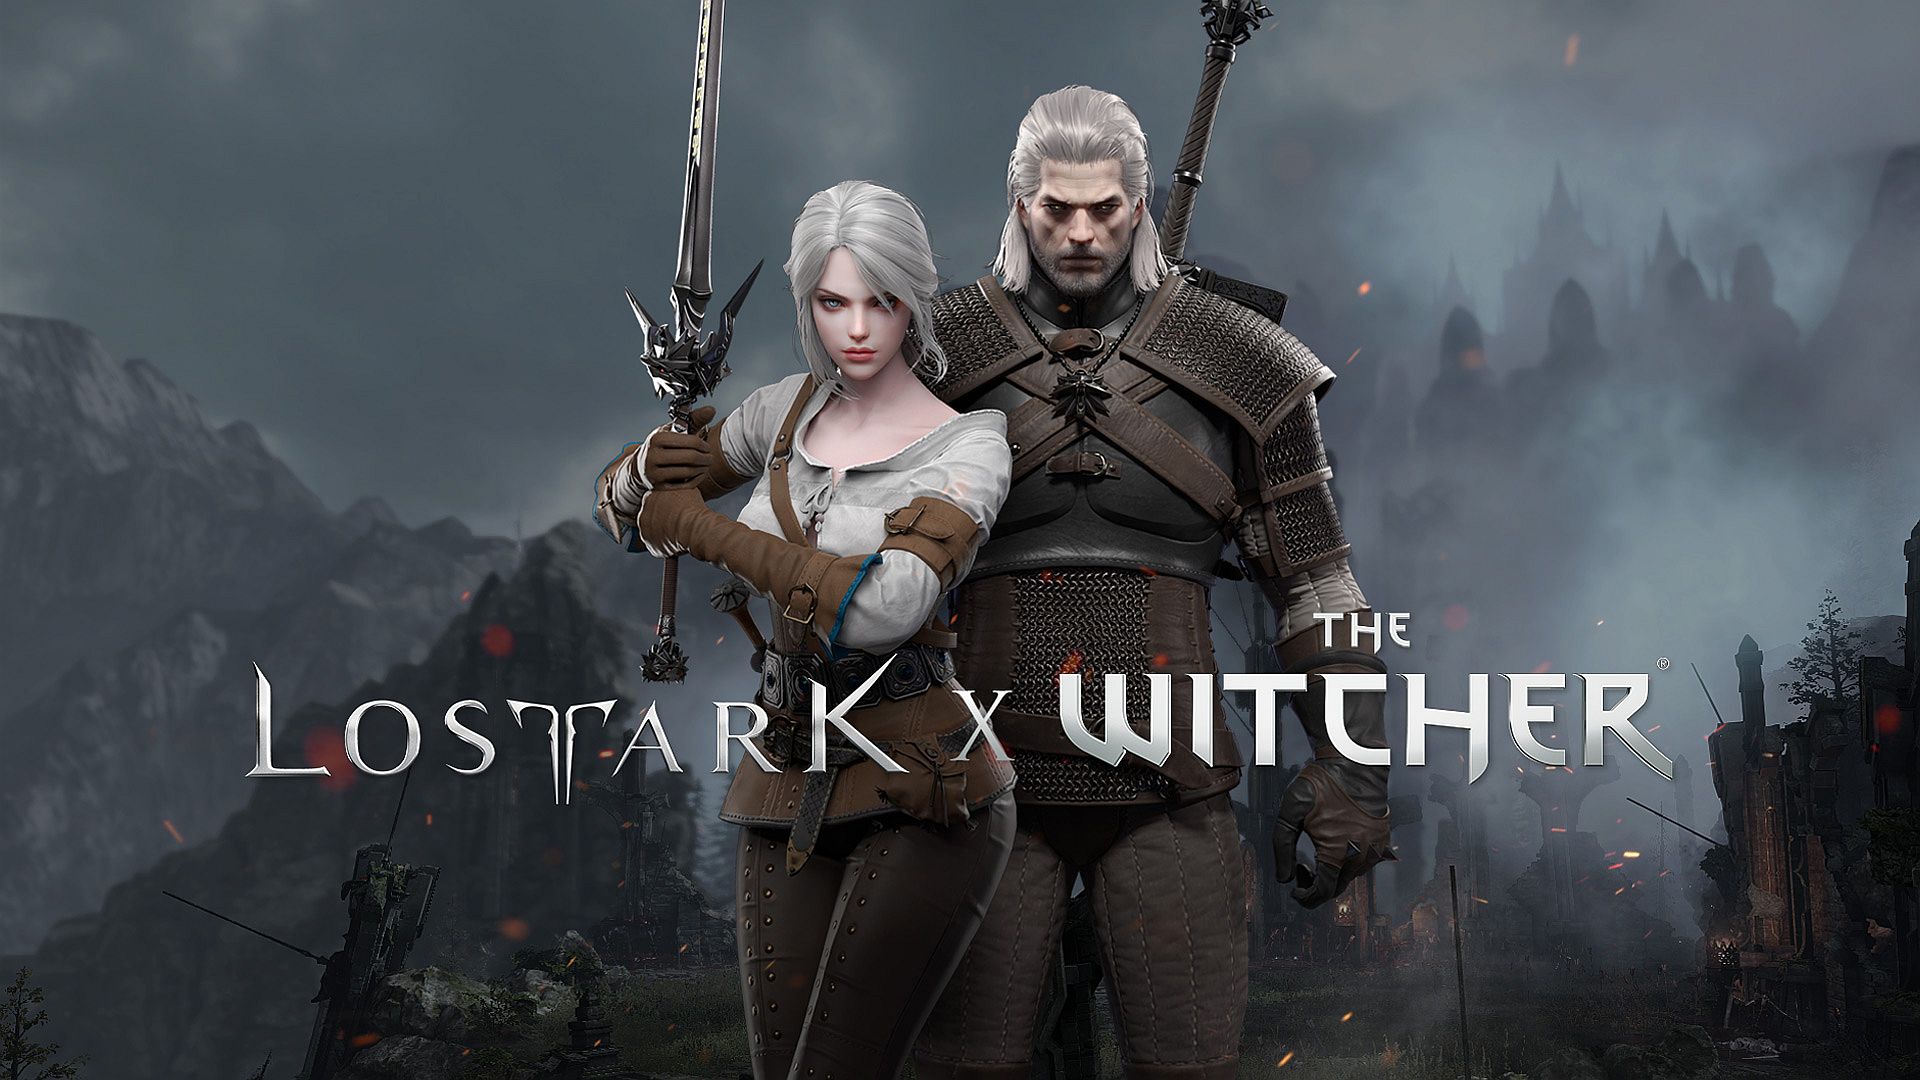 Image for Lost Ark and The Witcher crossover event coming in January